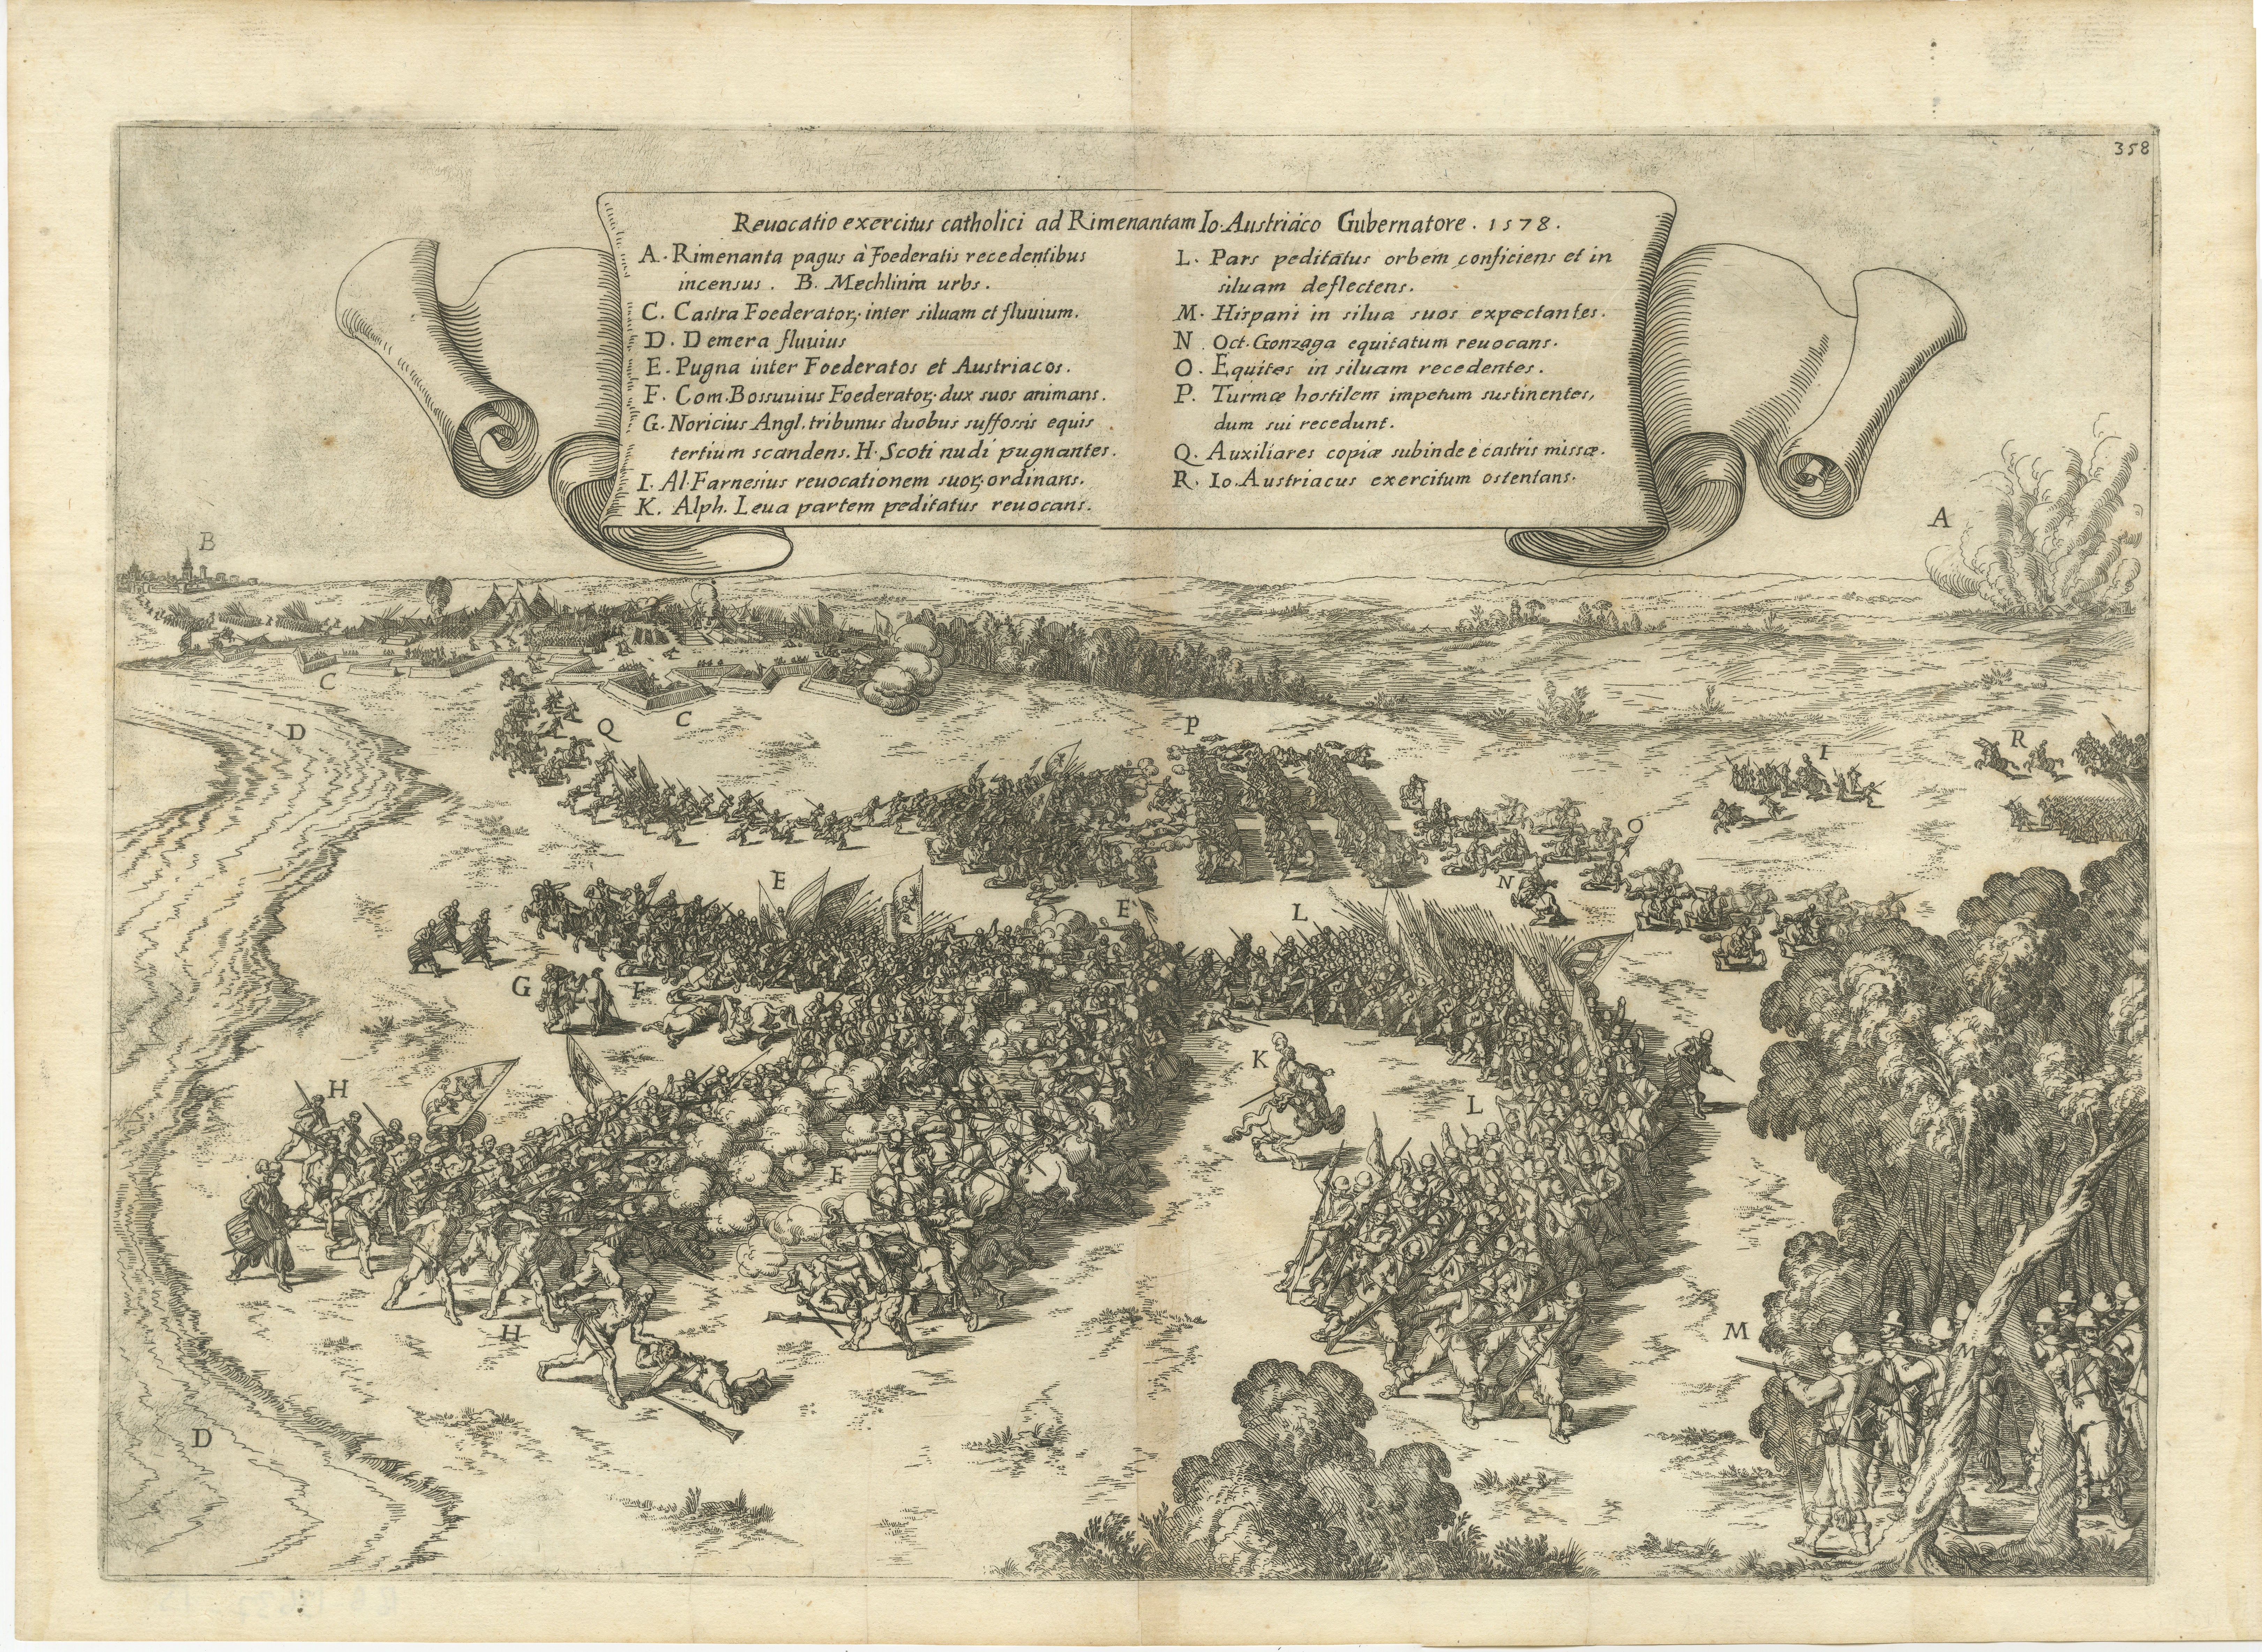 Rare engraving depicting a battle in the Eighty Year' War. 

The Battle of Rijmenam took place on July 31, 1578, during the early stages of the Eighty Years' War. It was a conflict between the States-General of the Netherlands and the Spanish